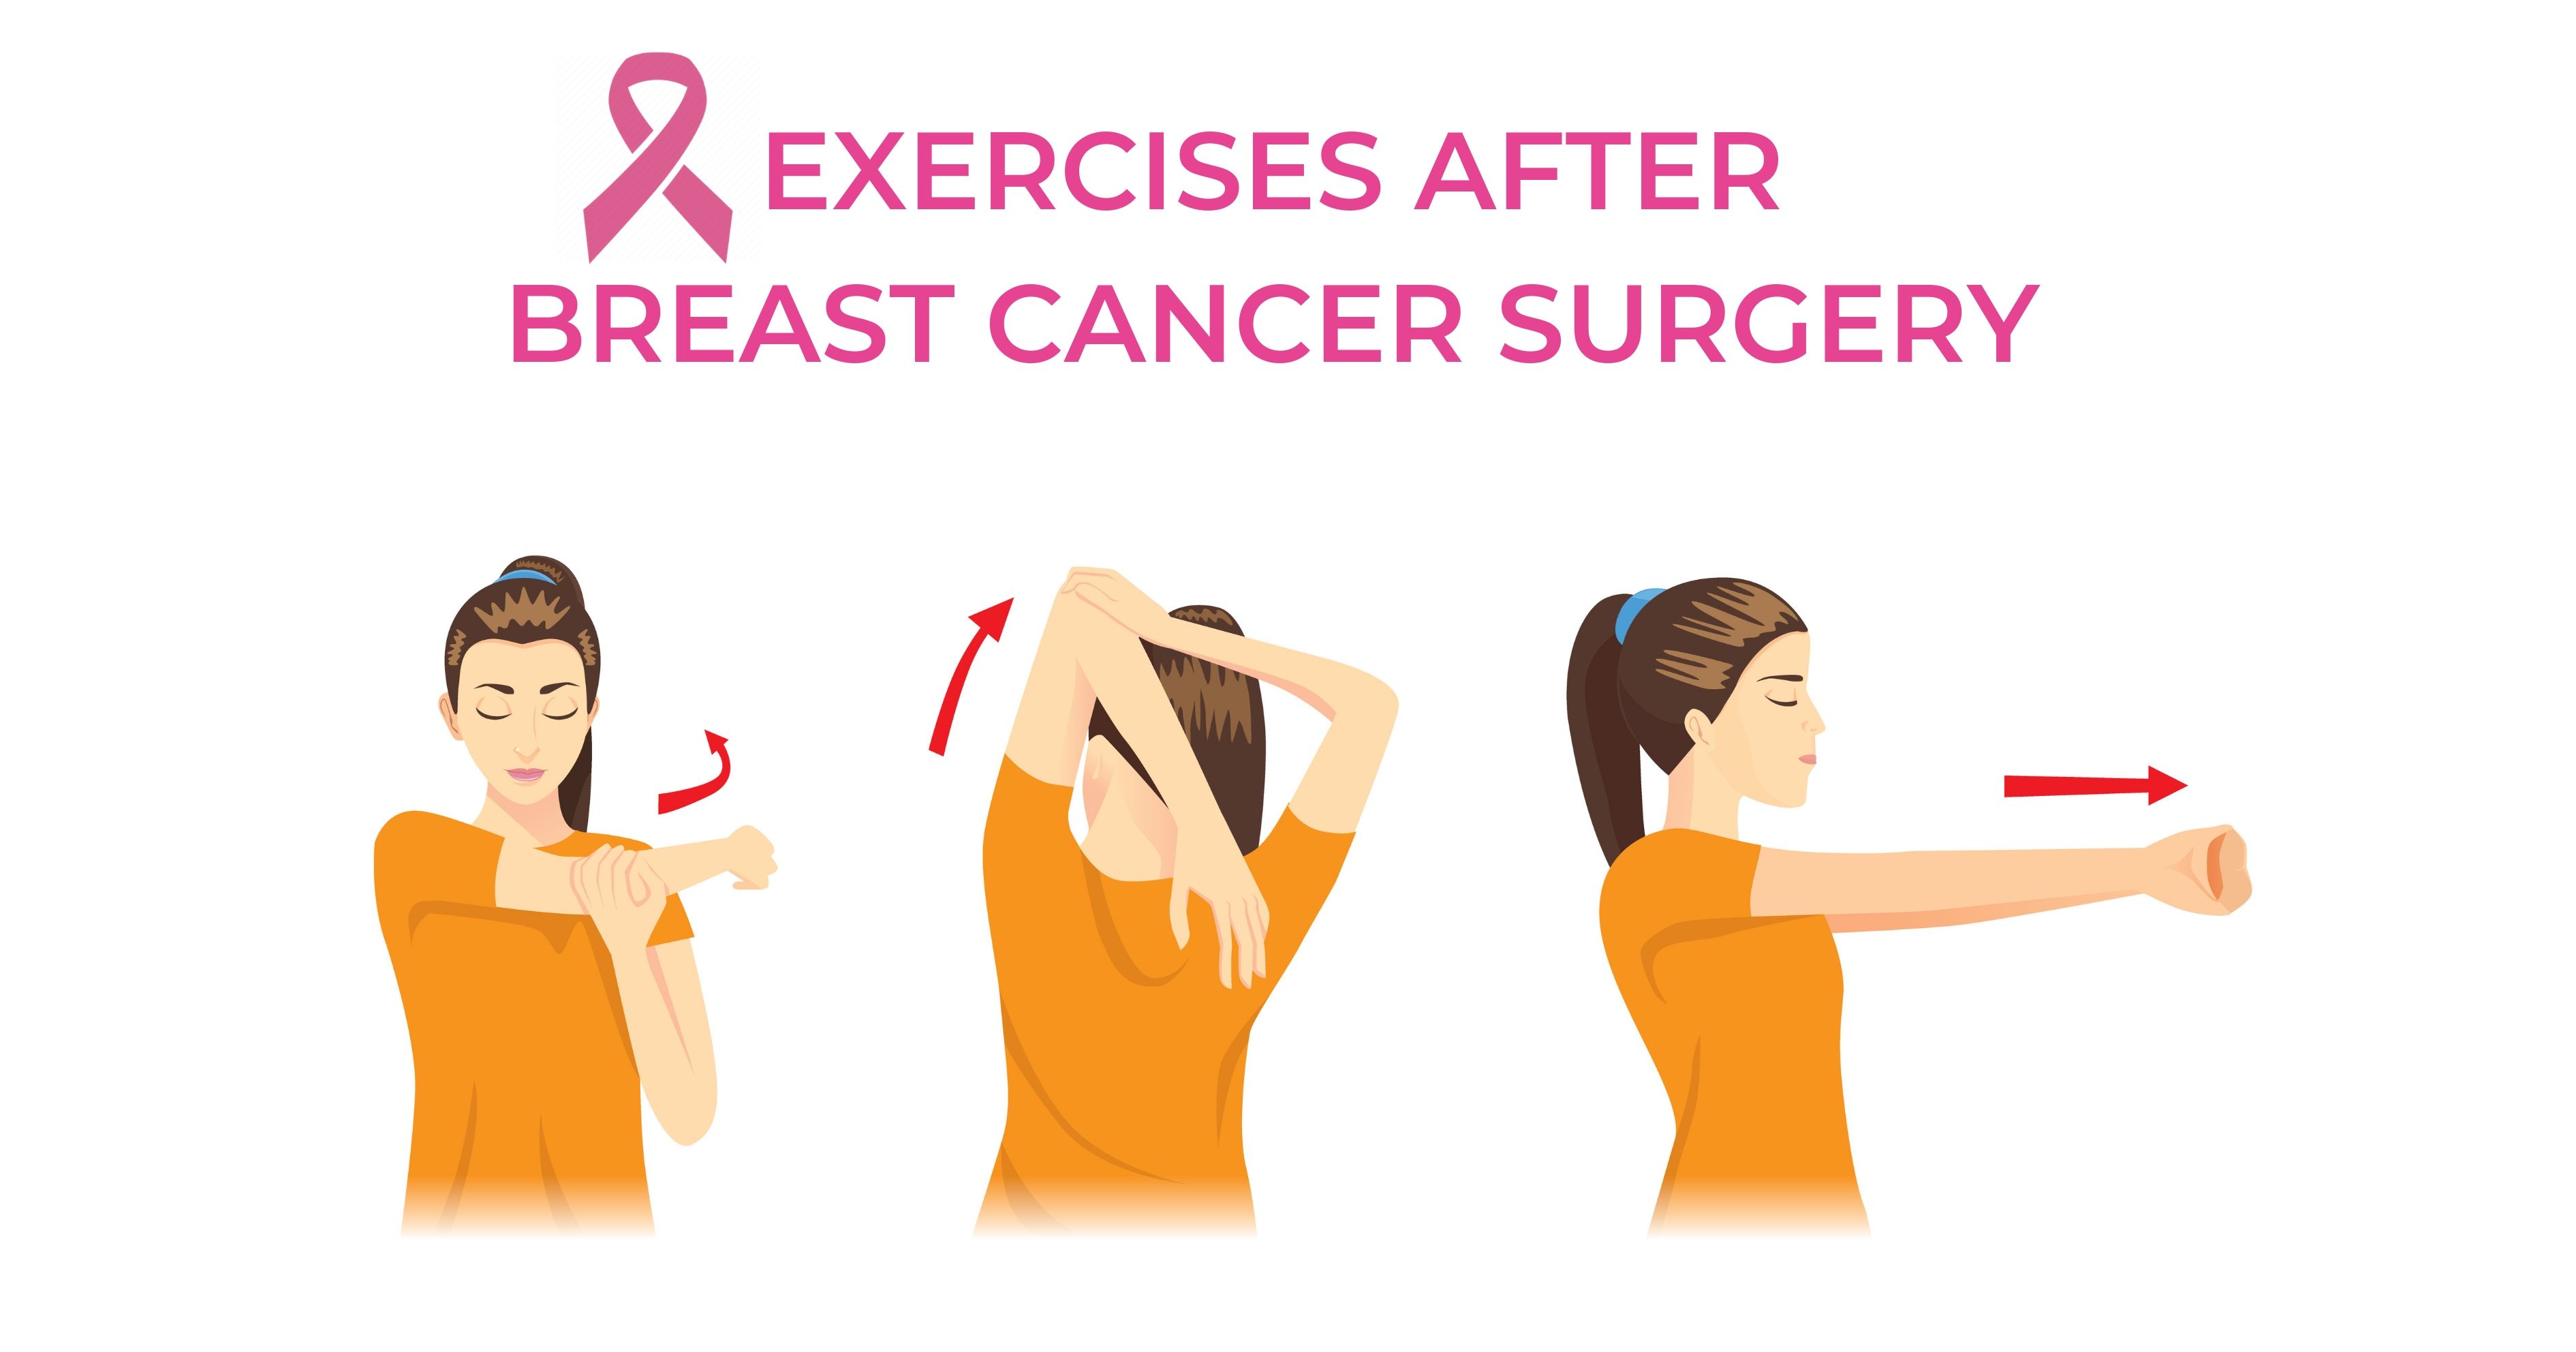 Exercises after breast cancer surgery